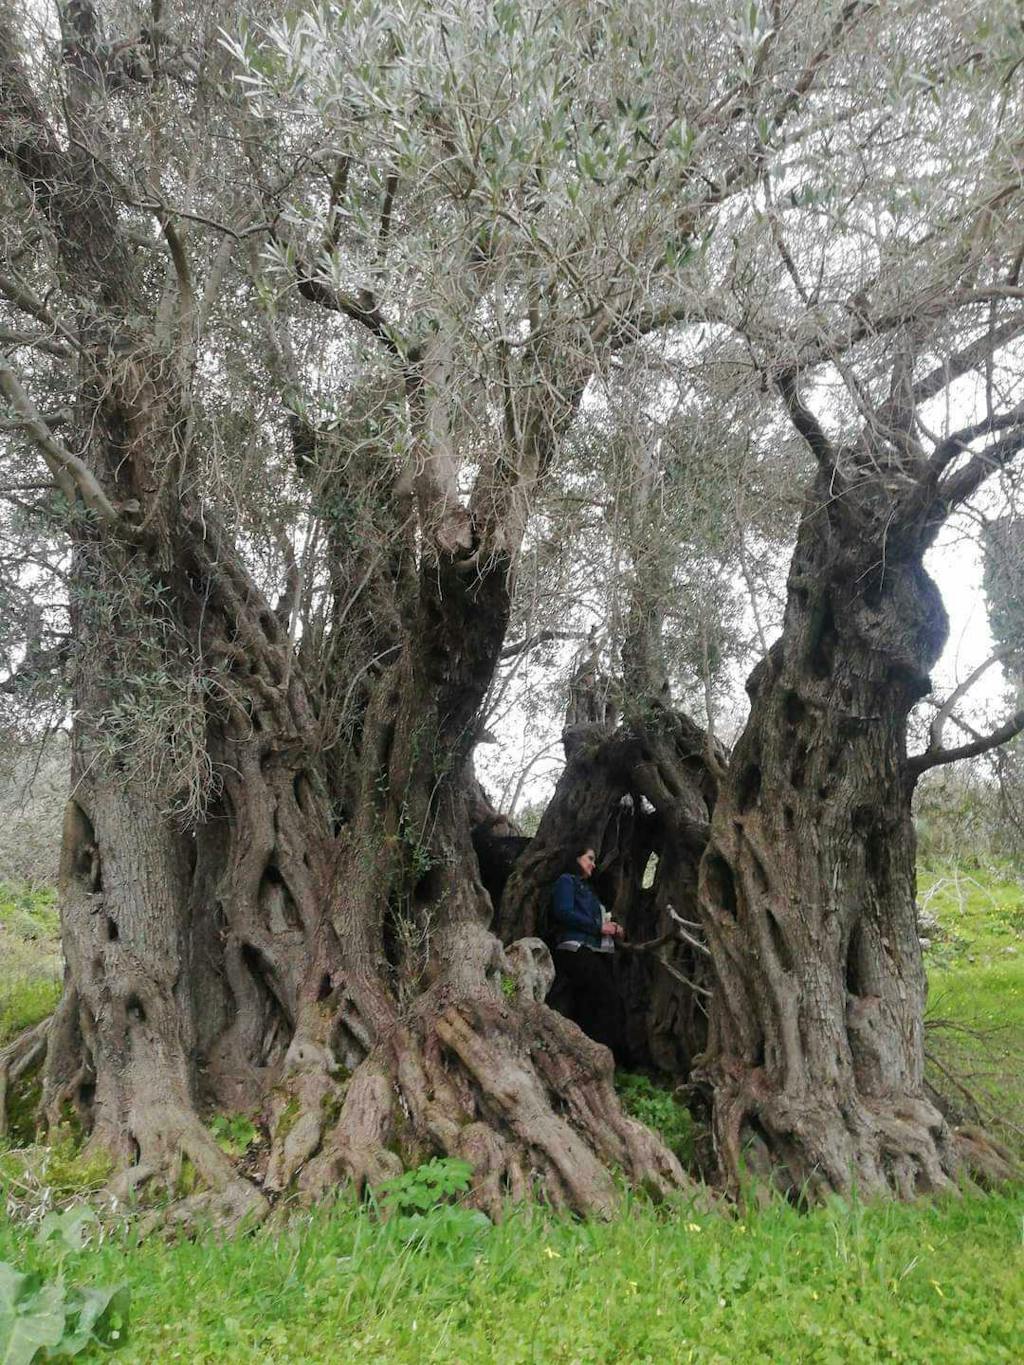 The Ancient Olive Tree of Fourfouras